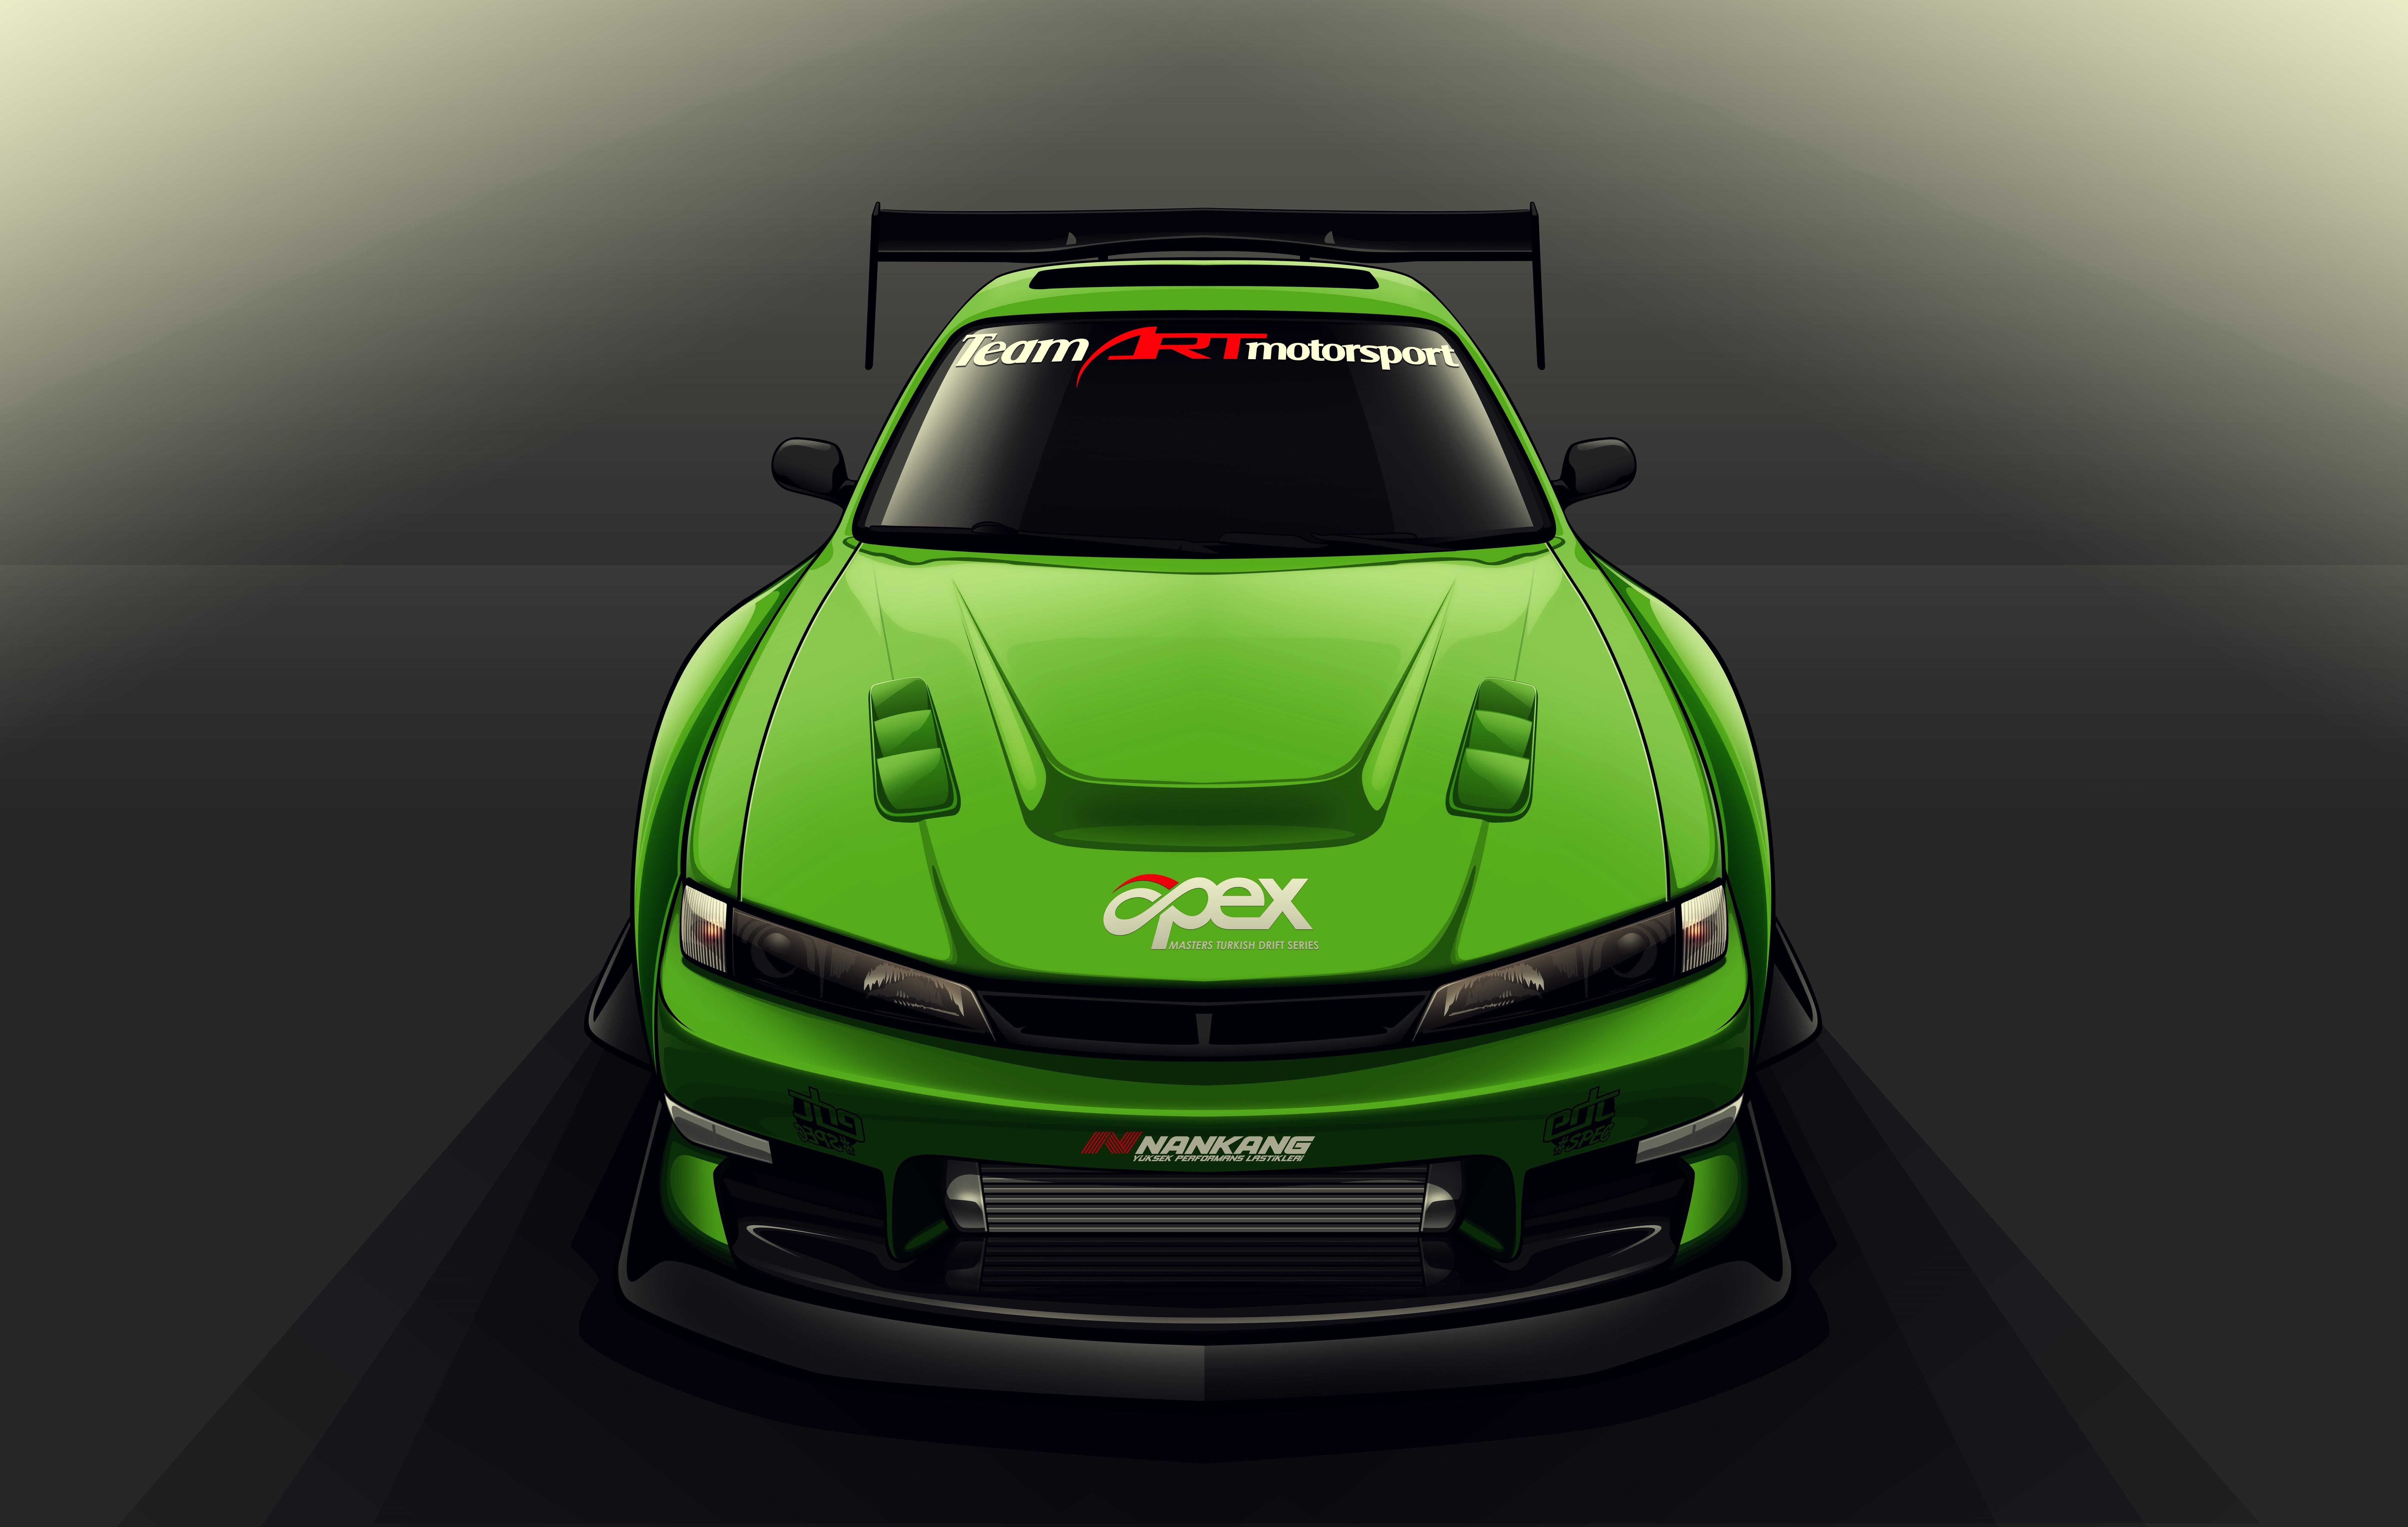 Wallpaper / connection, front view, green, car, no people, mode of transportation, green color, studio shot, indoors, transportation, Nissan, land vehicle, Drift Spec Vector free download